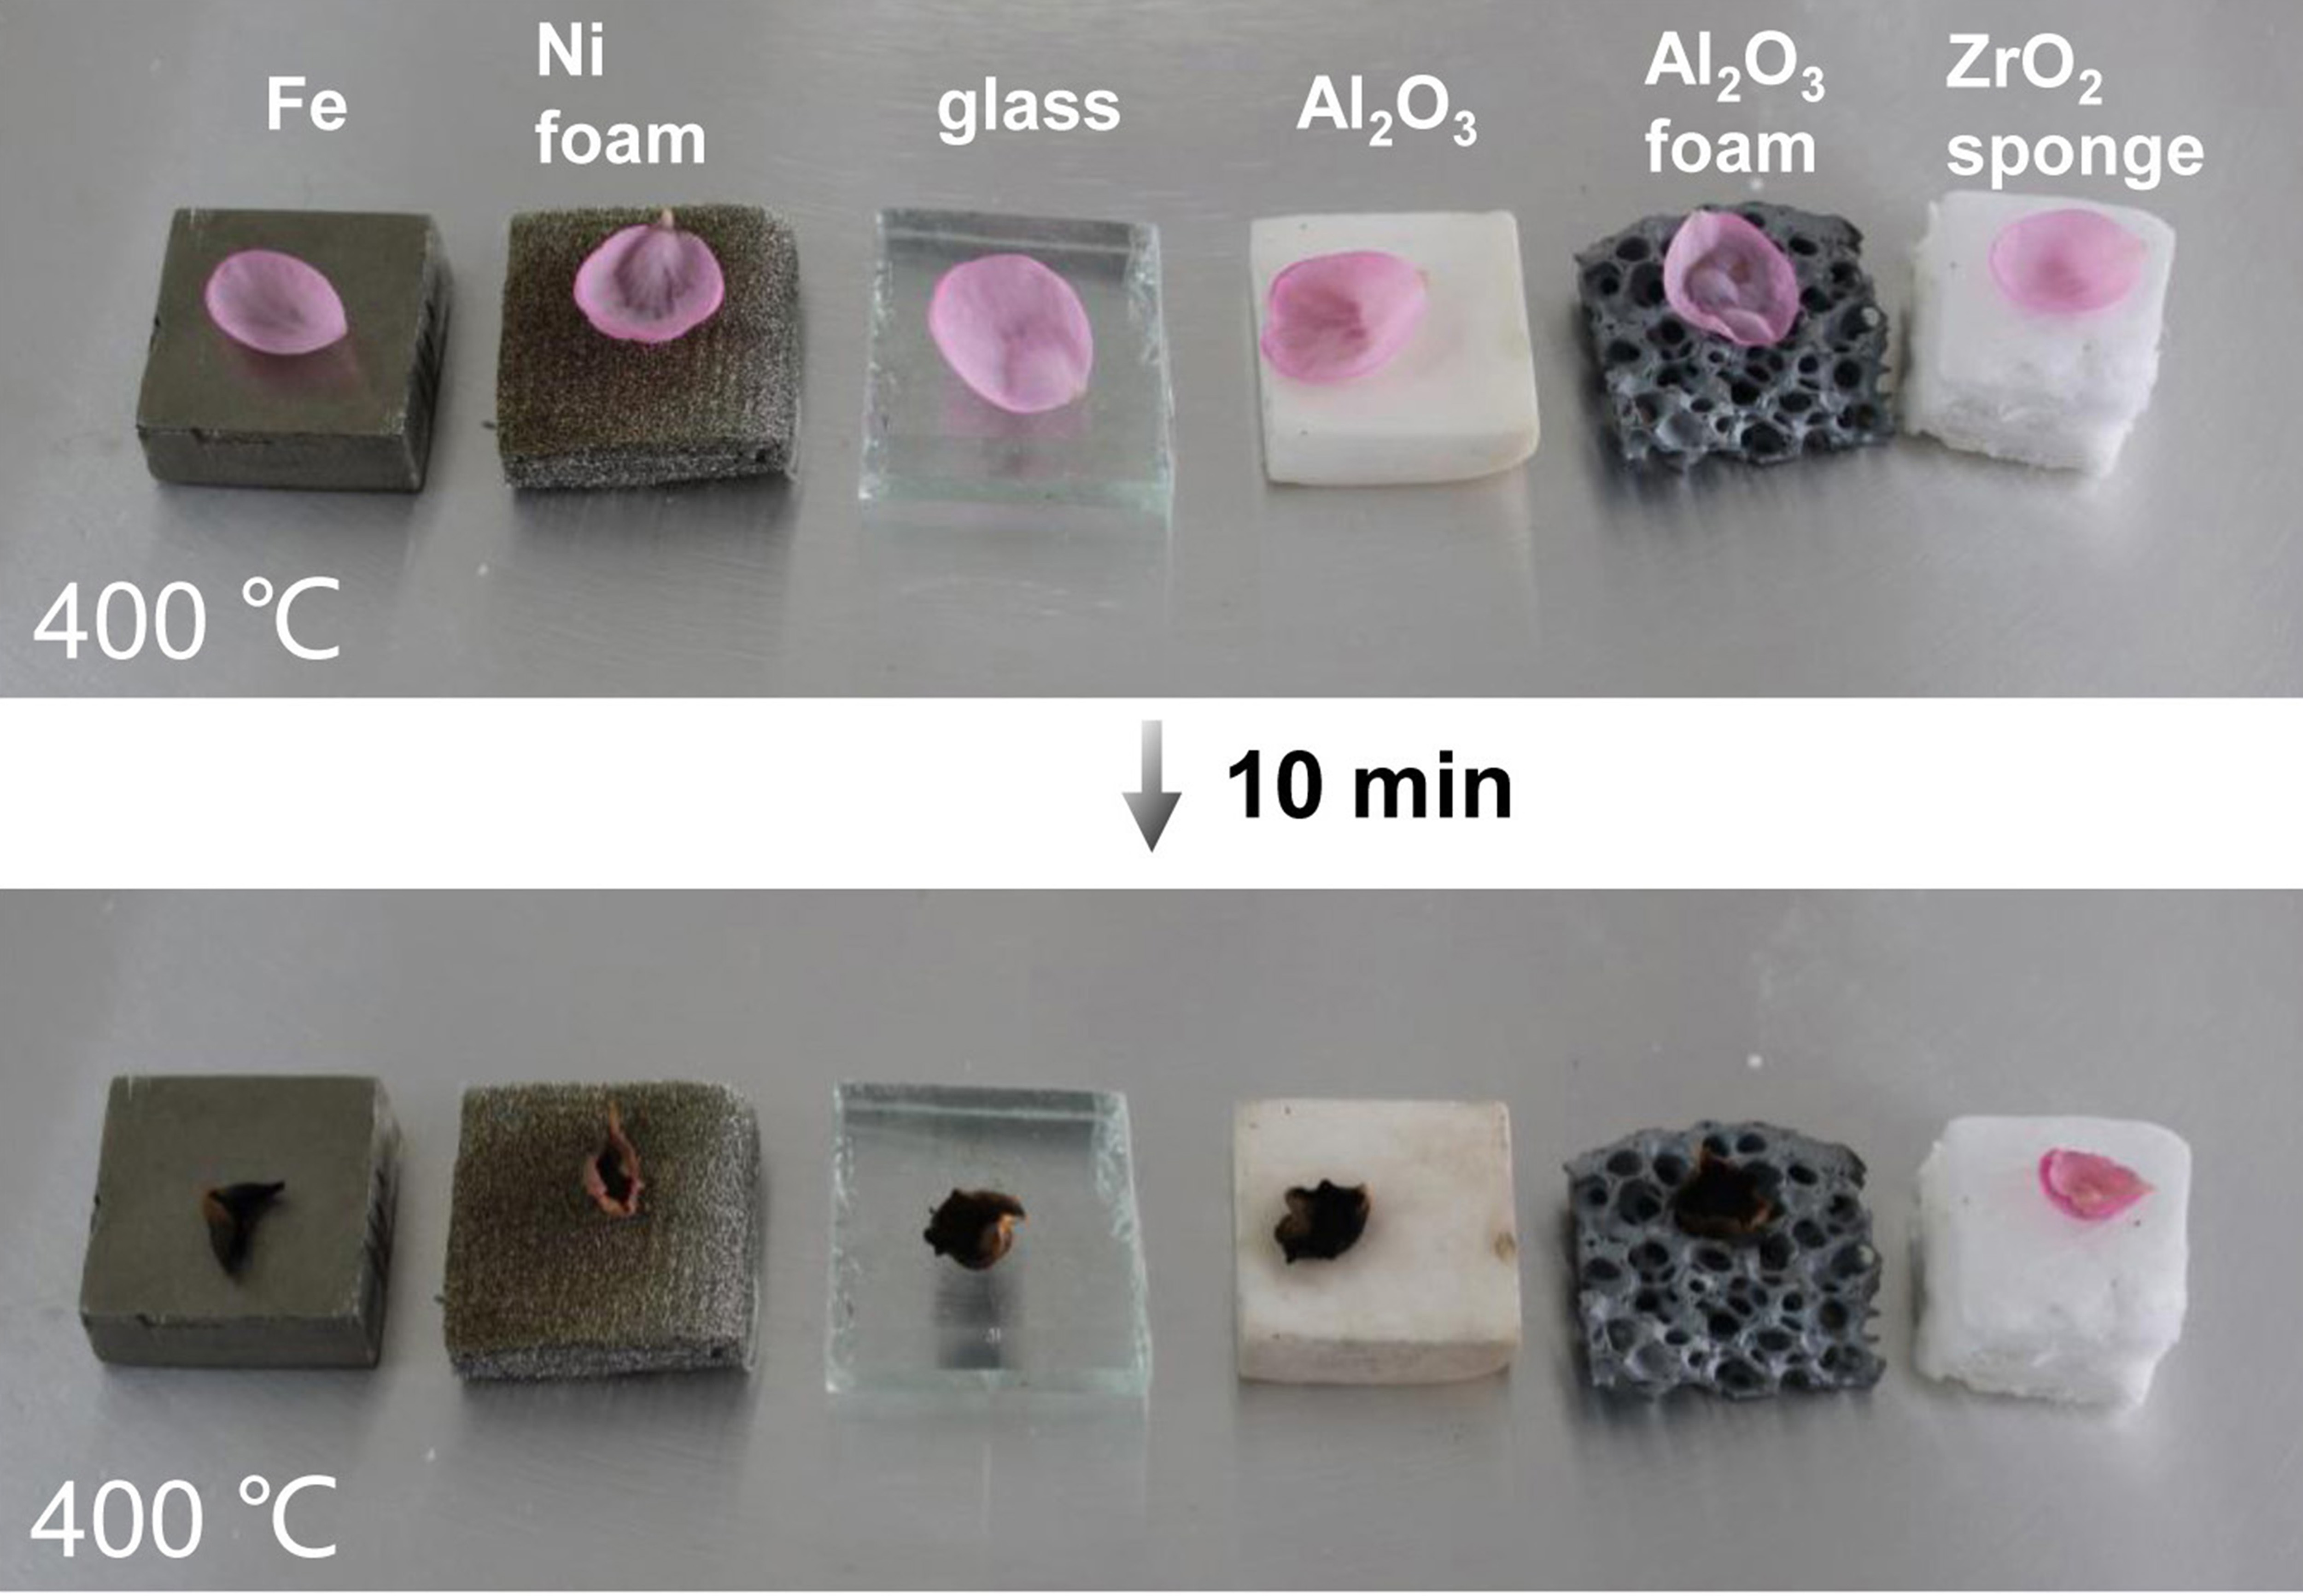 A porous, deformable sponge-like material made from ceramic nanofibers displays remarkable heat resistance. Here, flower petals are heated atop 7mm-thick discs of varying materials. After heating the materials from the bottom at 400°C, the petal atop the ceramic sponge is barely wilted, while the others are burnt to a crisp. Image: Gao/Li/Wu/Brown University/Tsingua University.